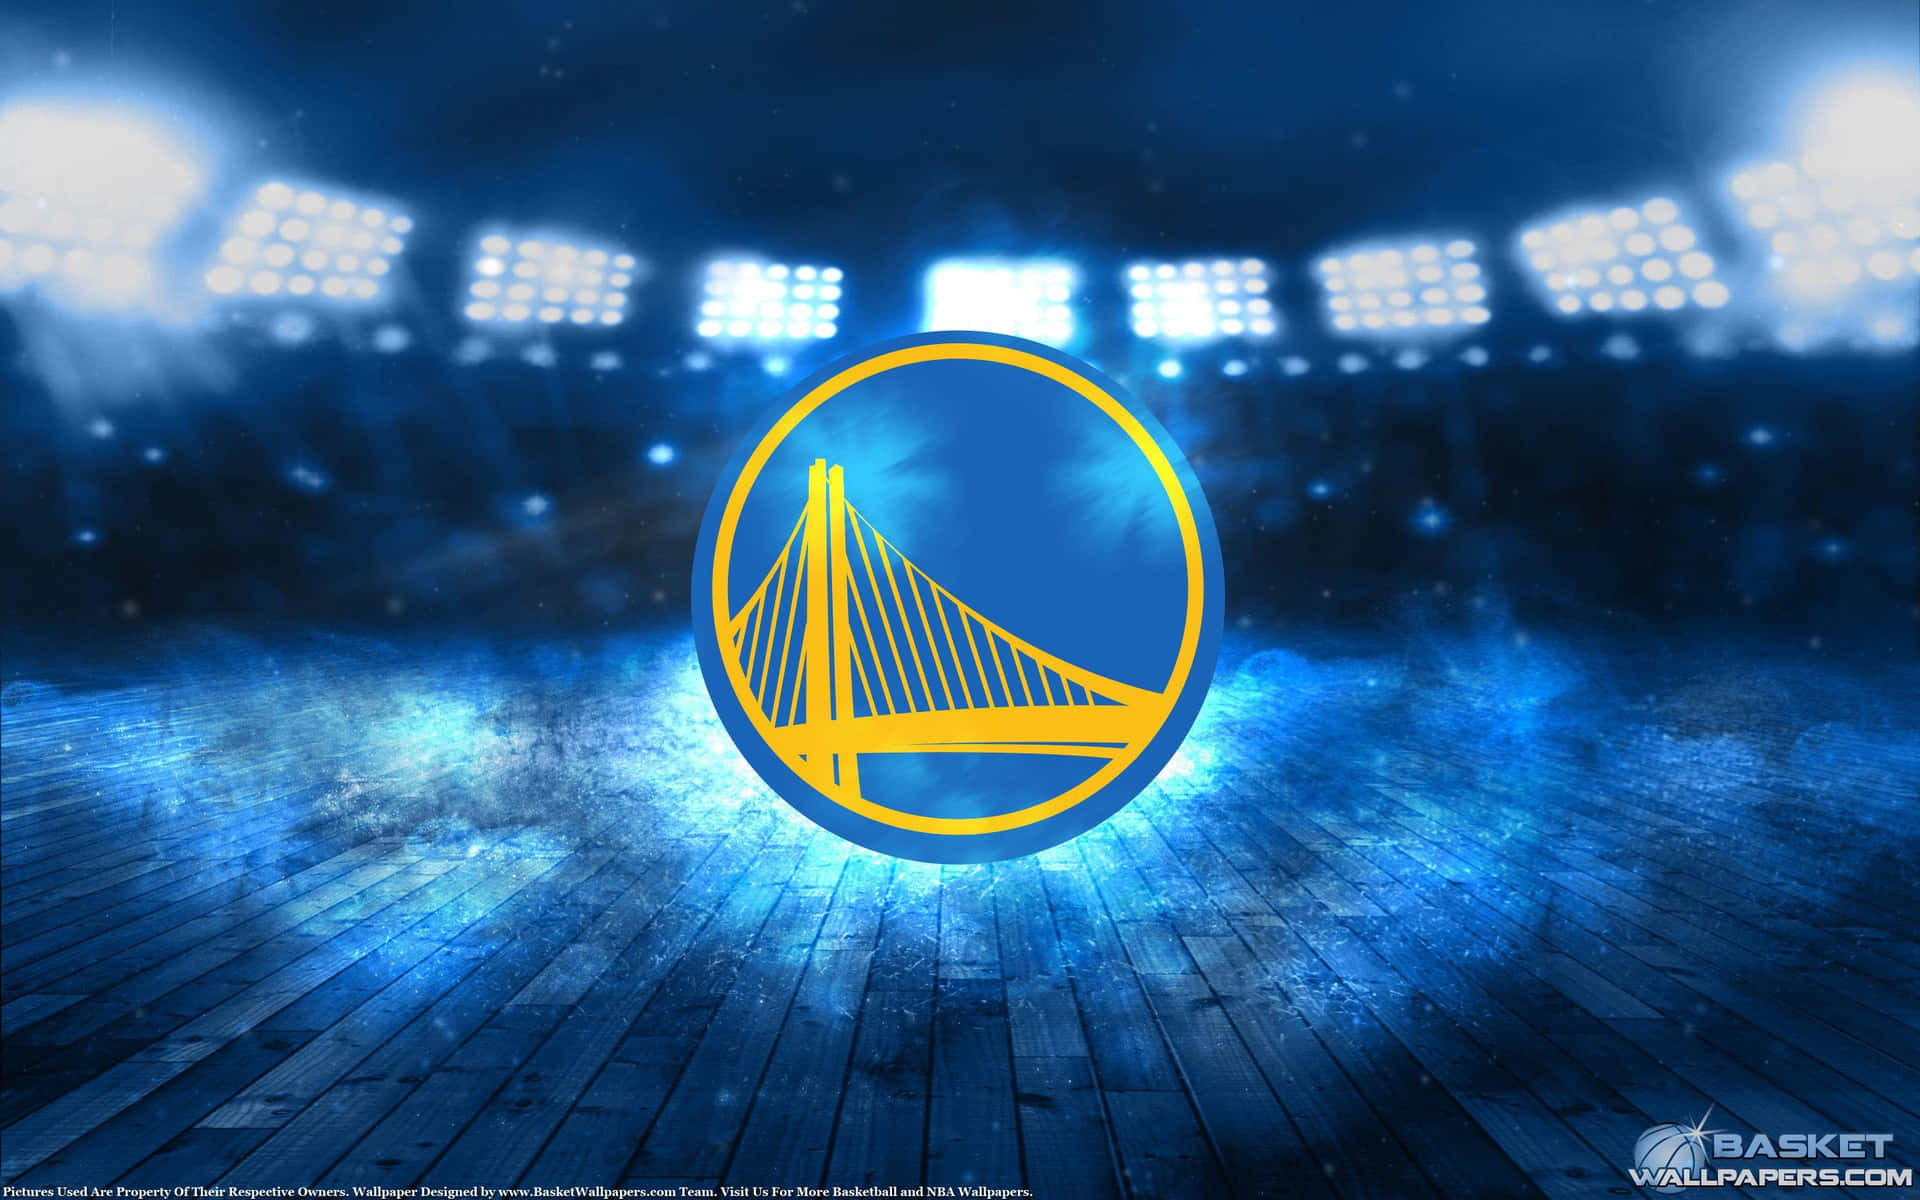 Warriors to celebrate 40th anniversary with special jersey, logo